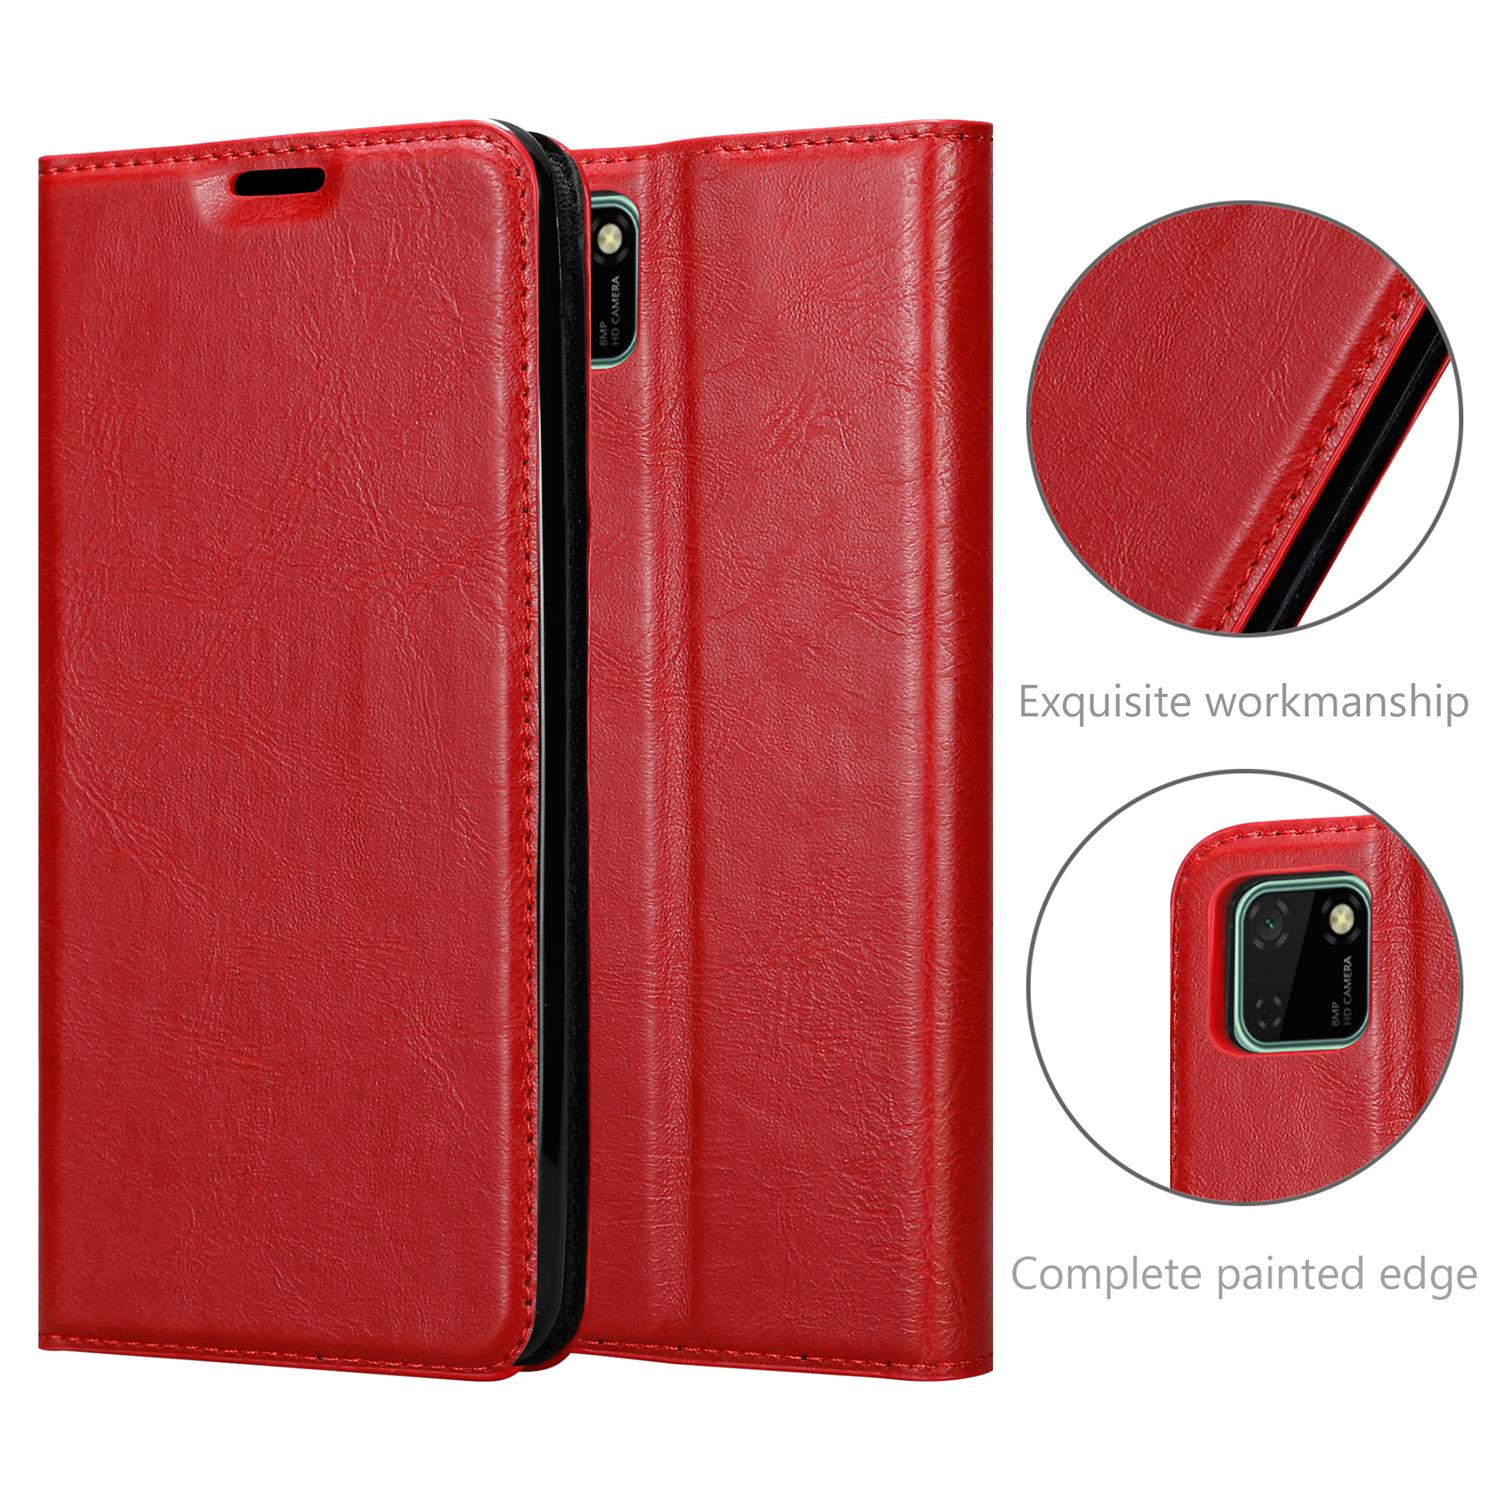 CADORABO Book Hülle Invisible Magnet, ROT Huawei Honor, Y5P, Bookcover, / APFEL 9S